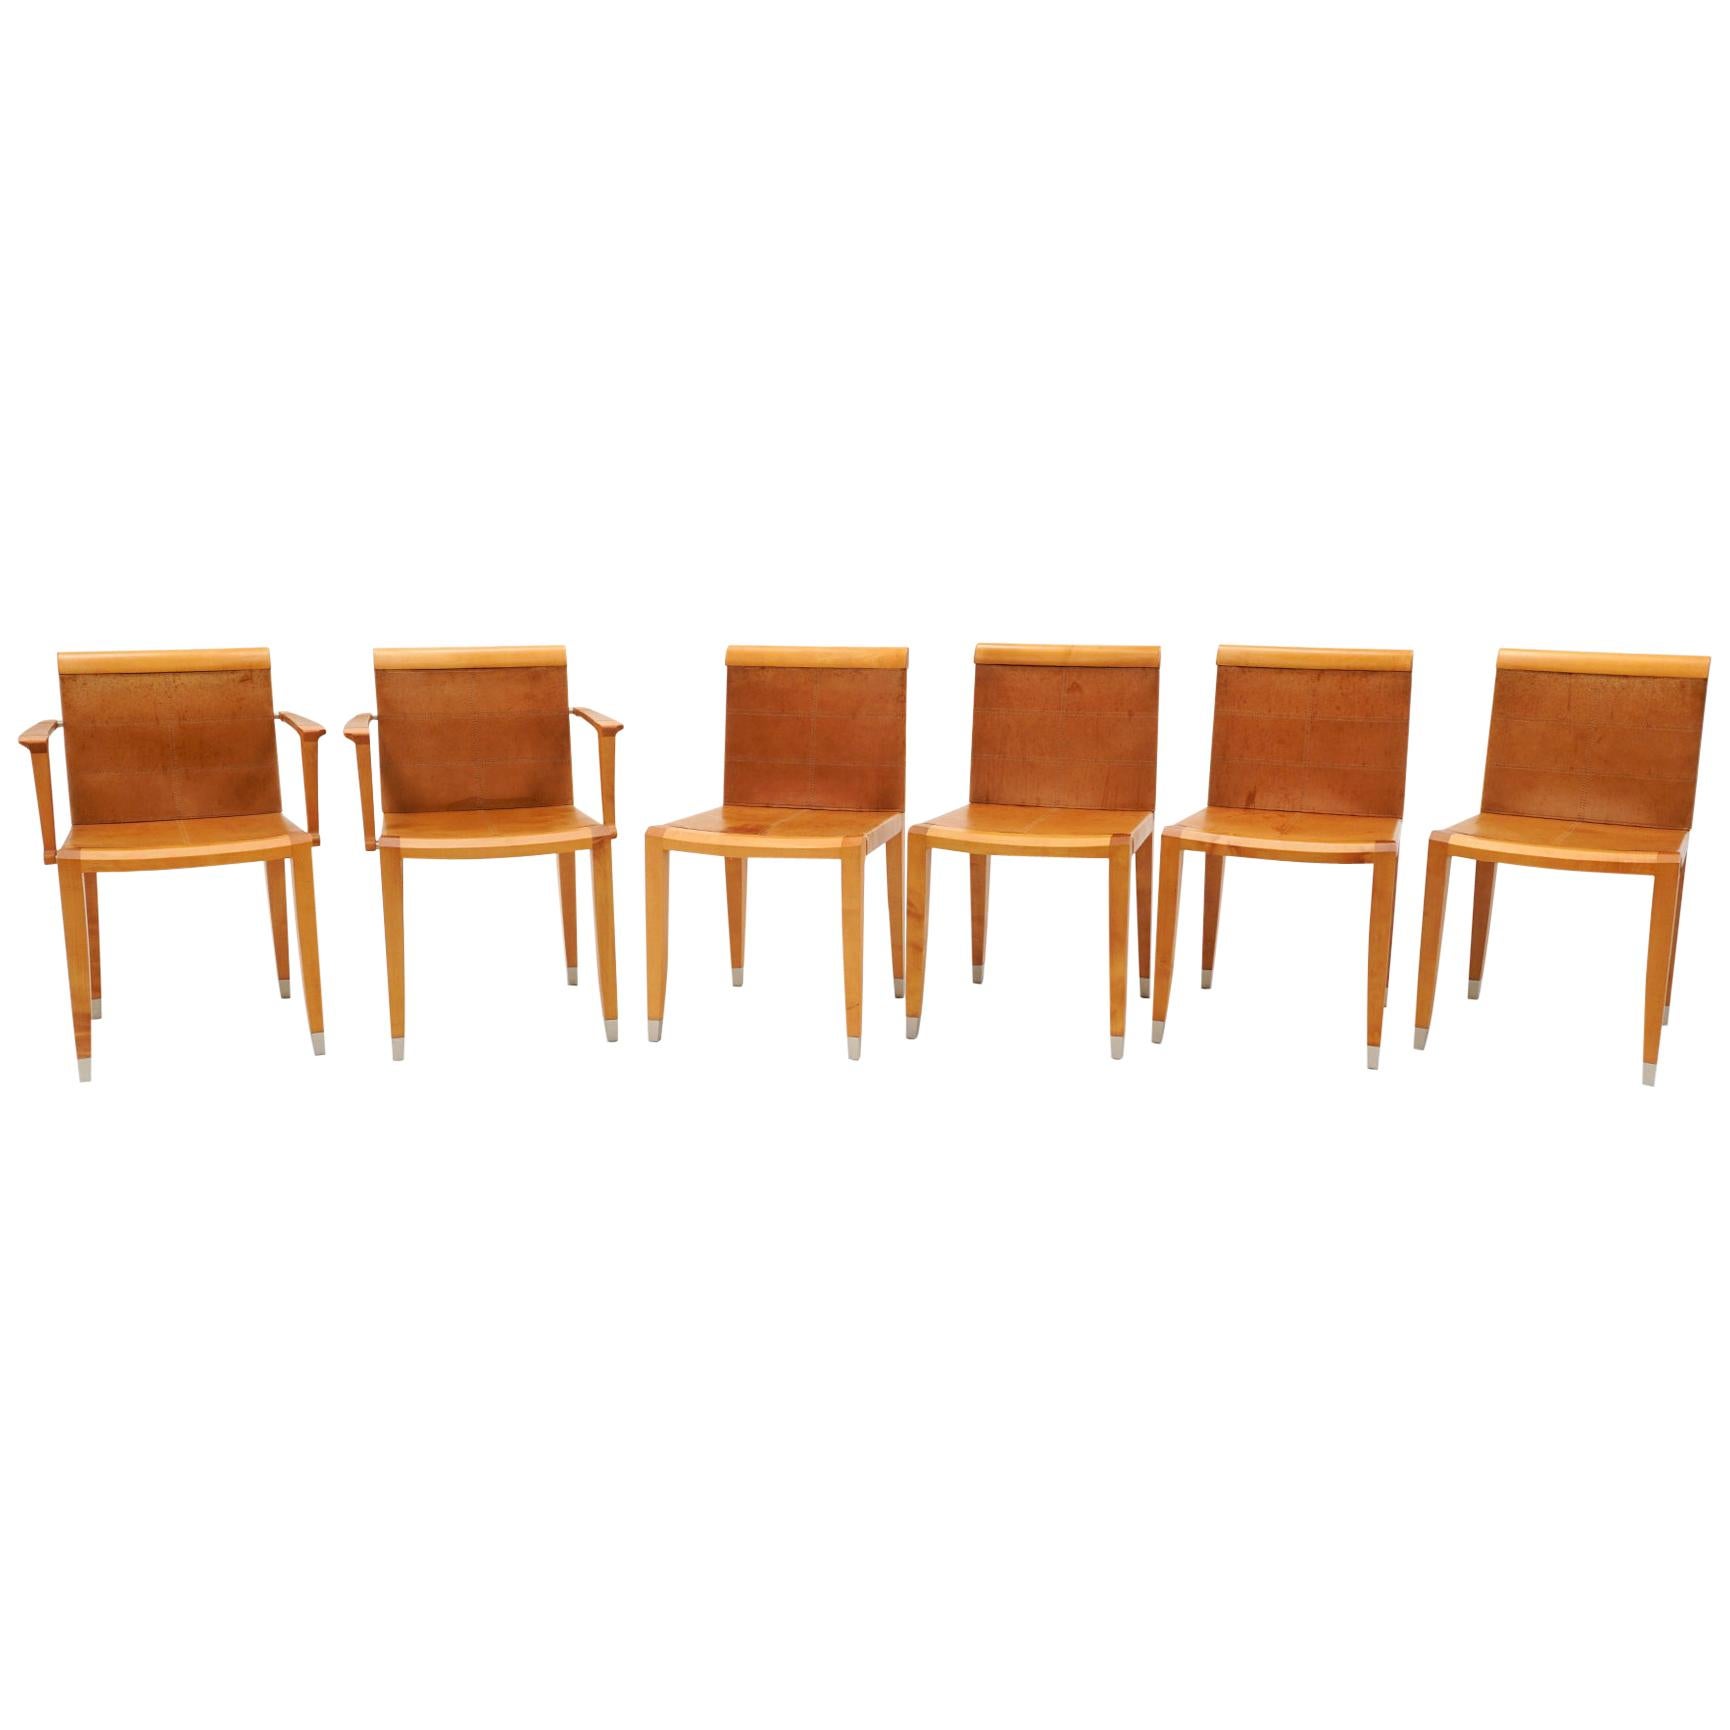 Six Giorgetti Dining Chairs in Cognac Leather